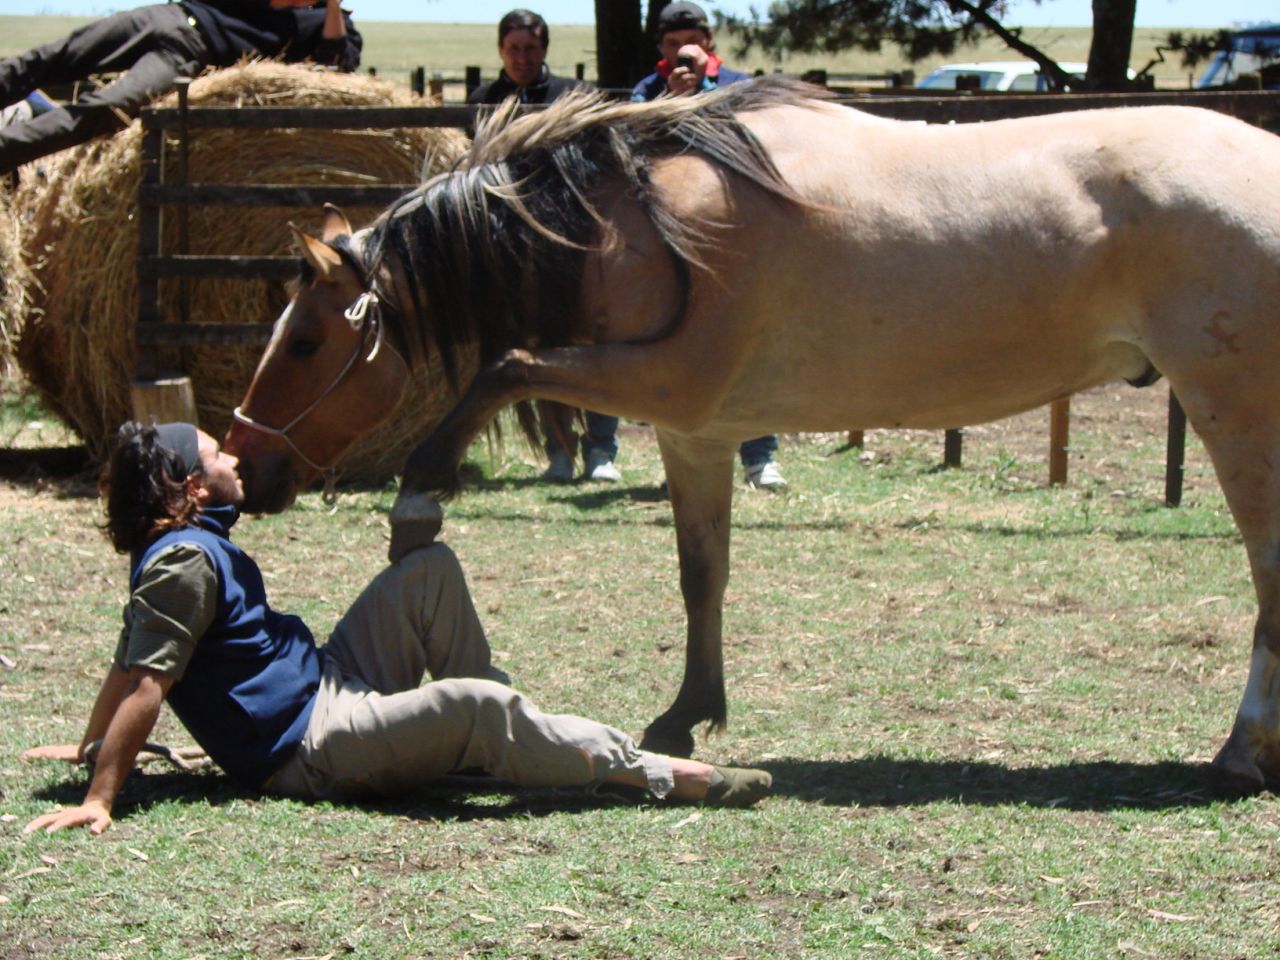 Scarpati, pictured here playing with a horse at the school, grew up in San Luis -- a mountain town at the base of the Sierras de Cordoba range.